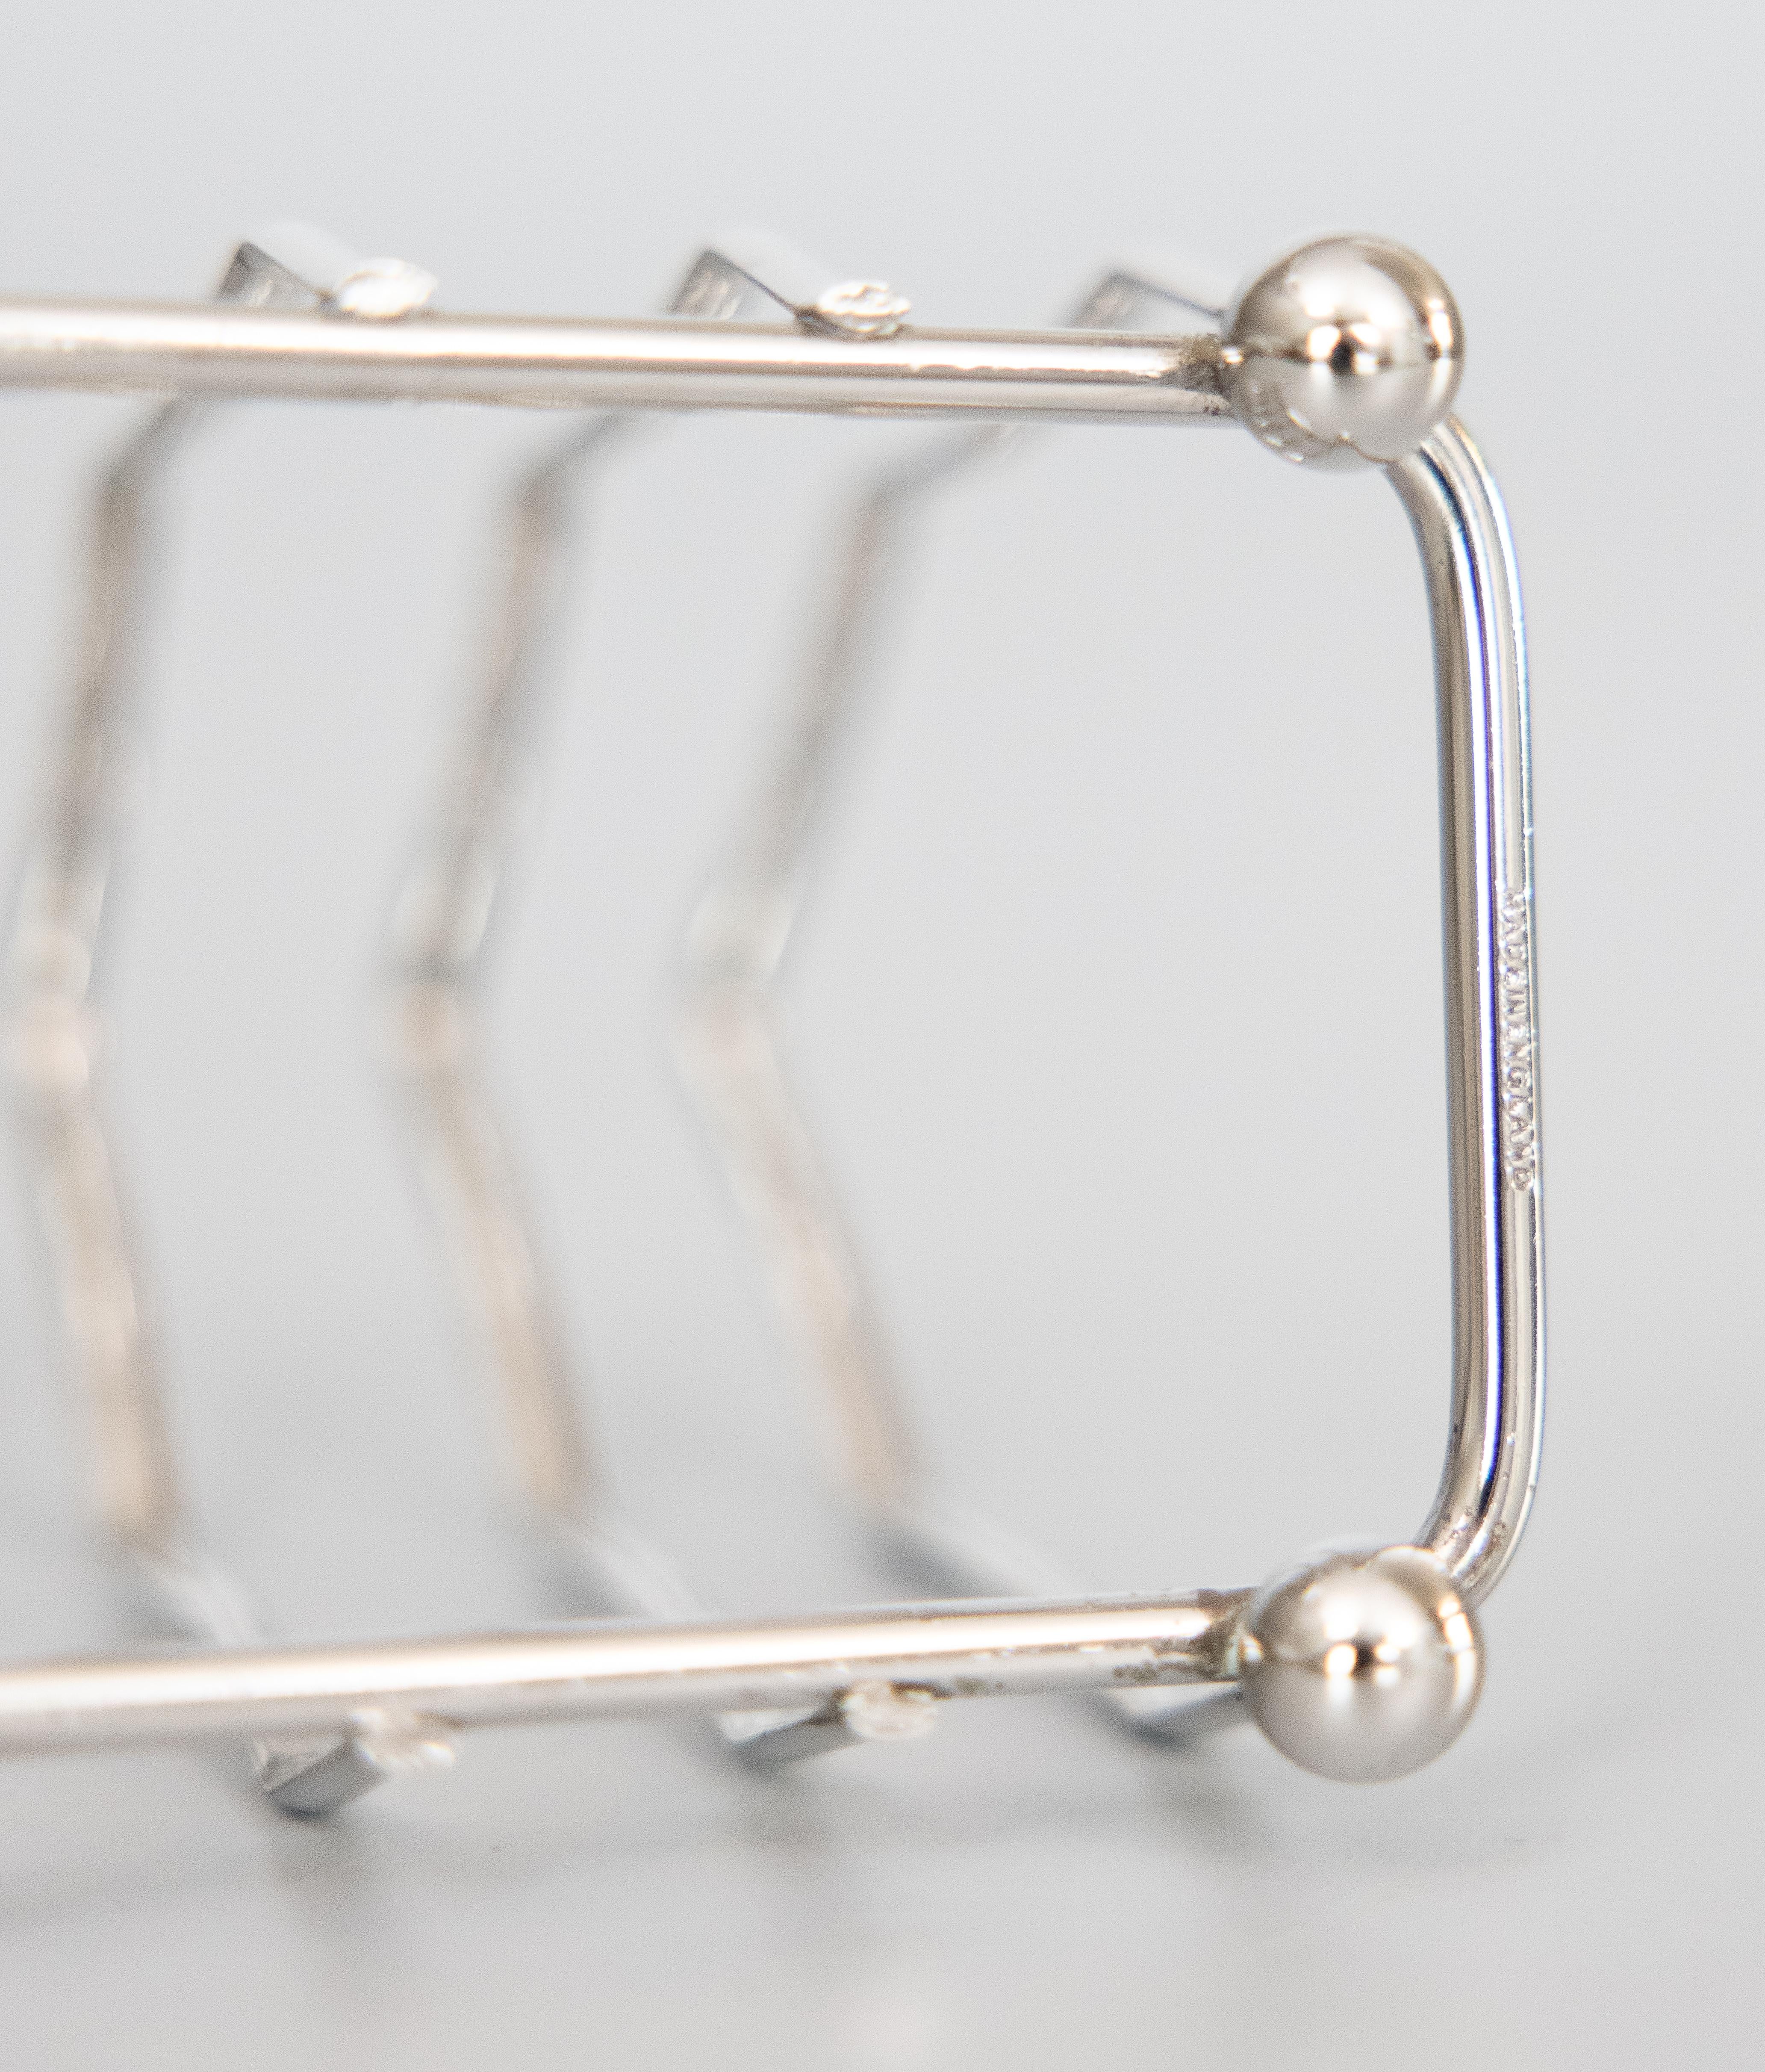 Art Deco Style English Silver Plate Toast Rack Letter Holder, circa 1950 For Sale 3